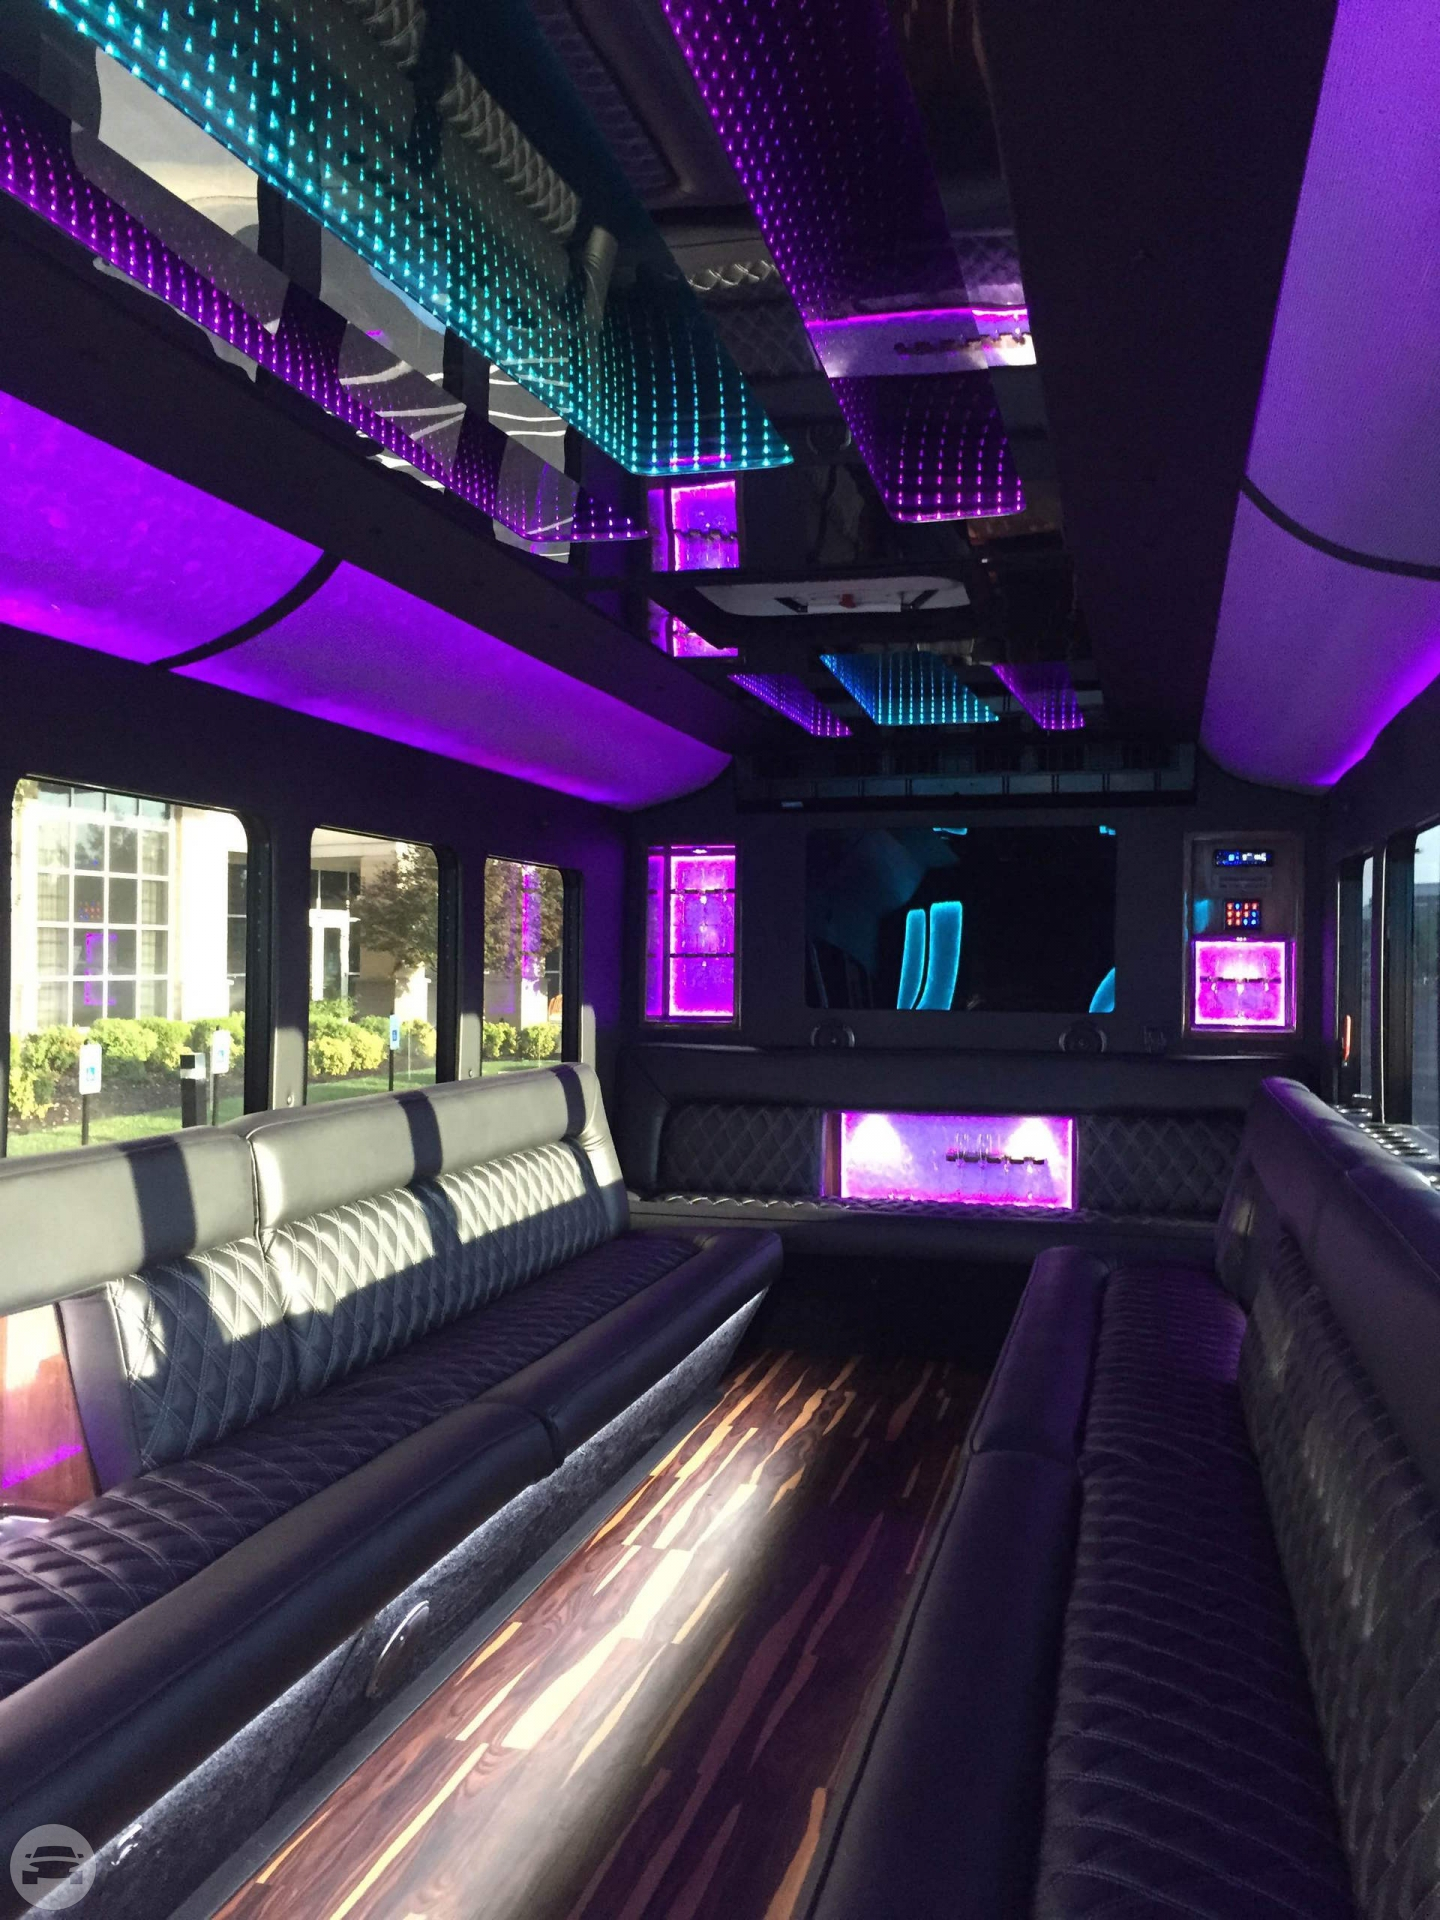 25 Passenger Party Limo Bus
Party Limo Bus /
Fayetteville, AR

 / Hourly $0.00
